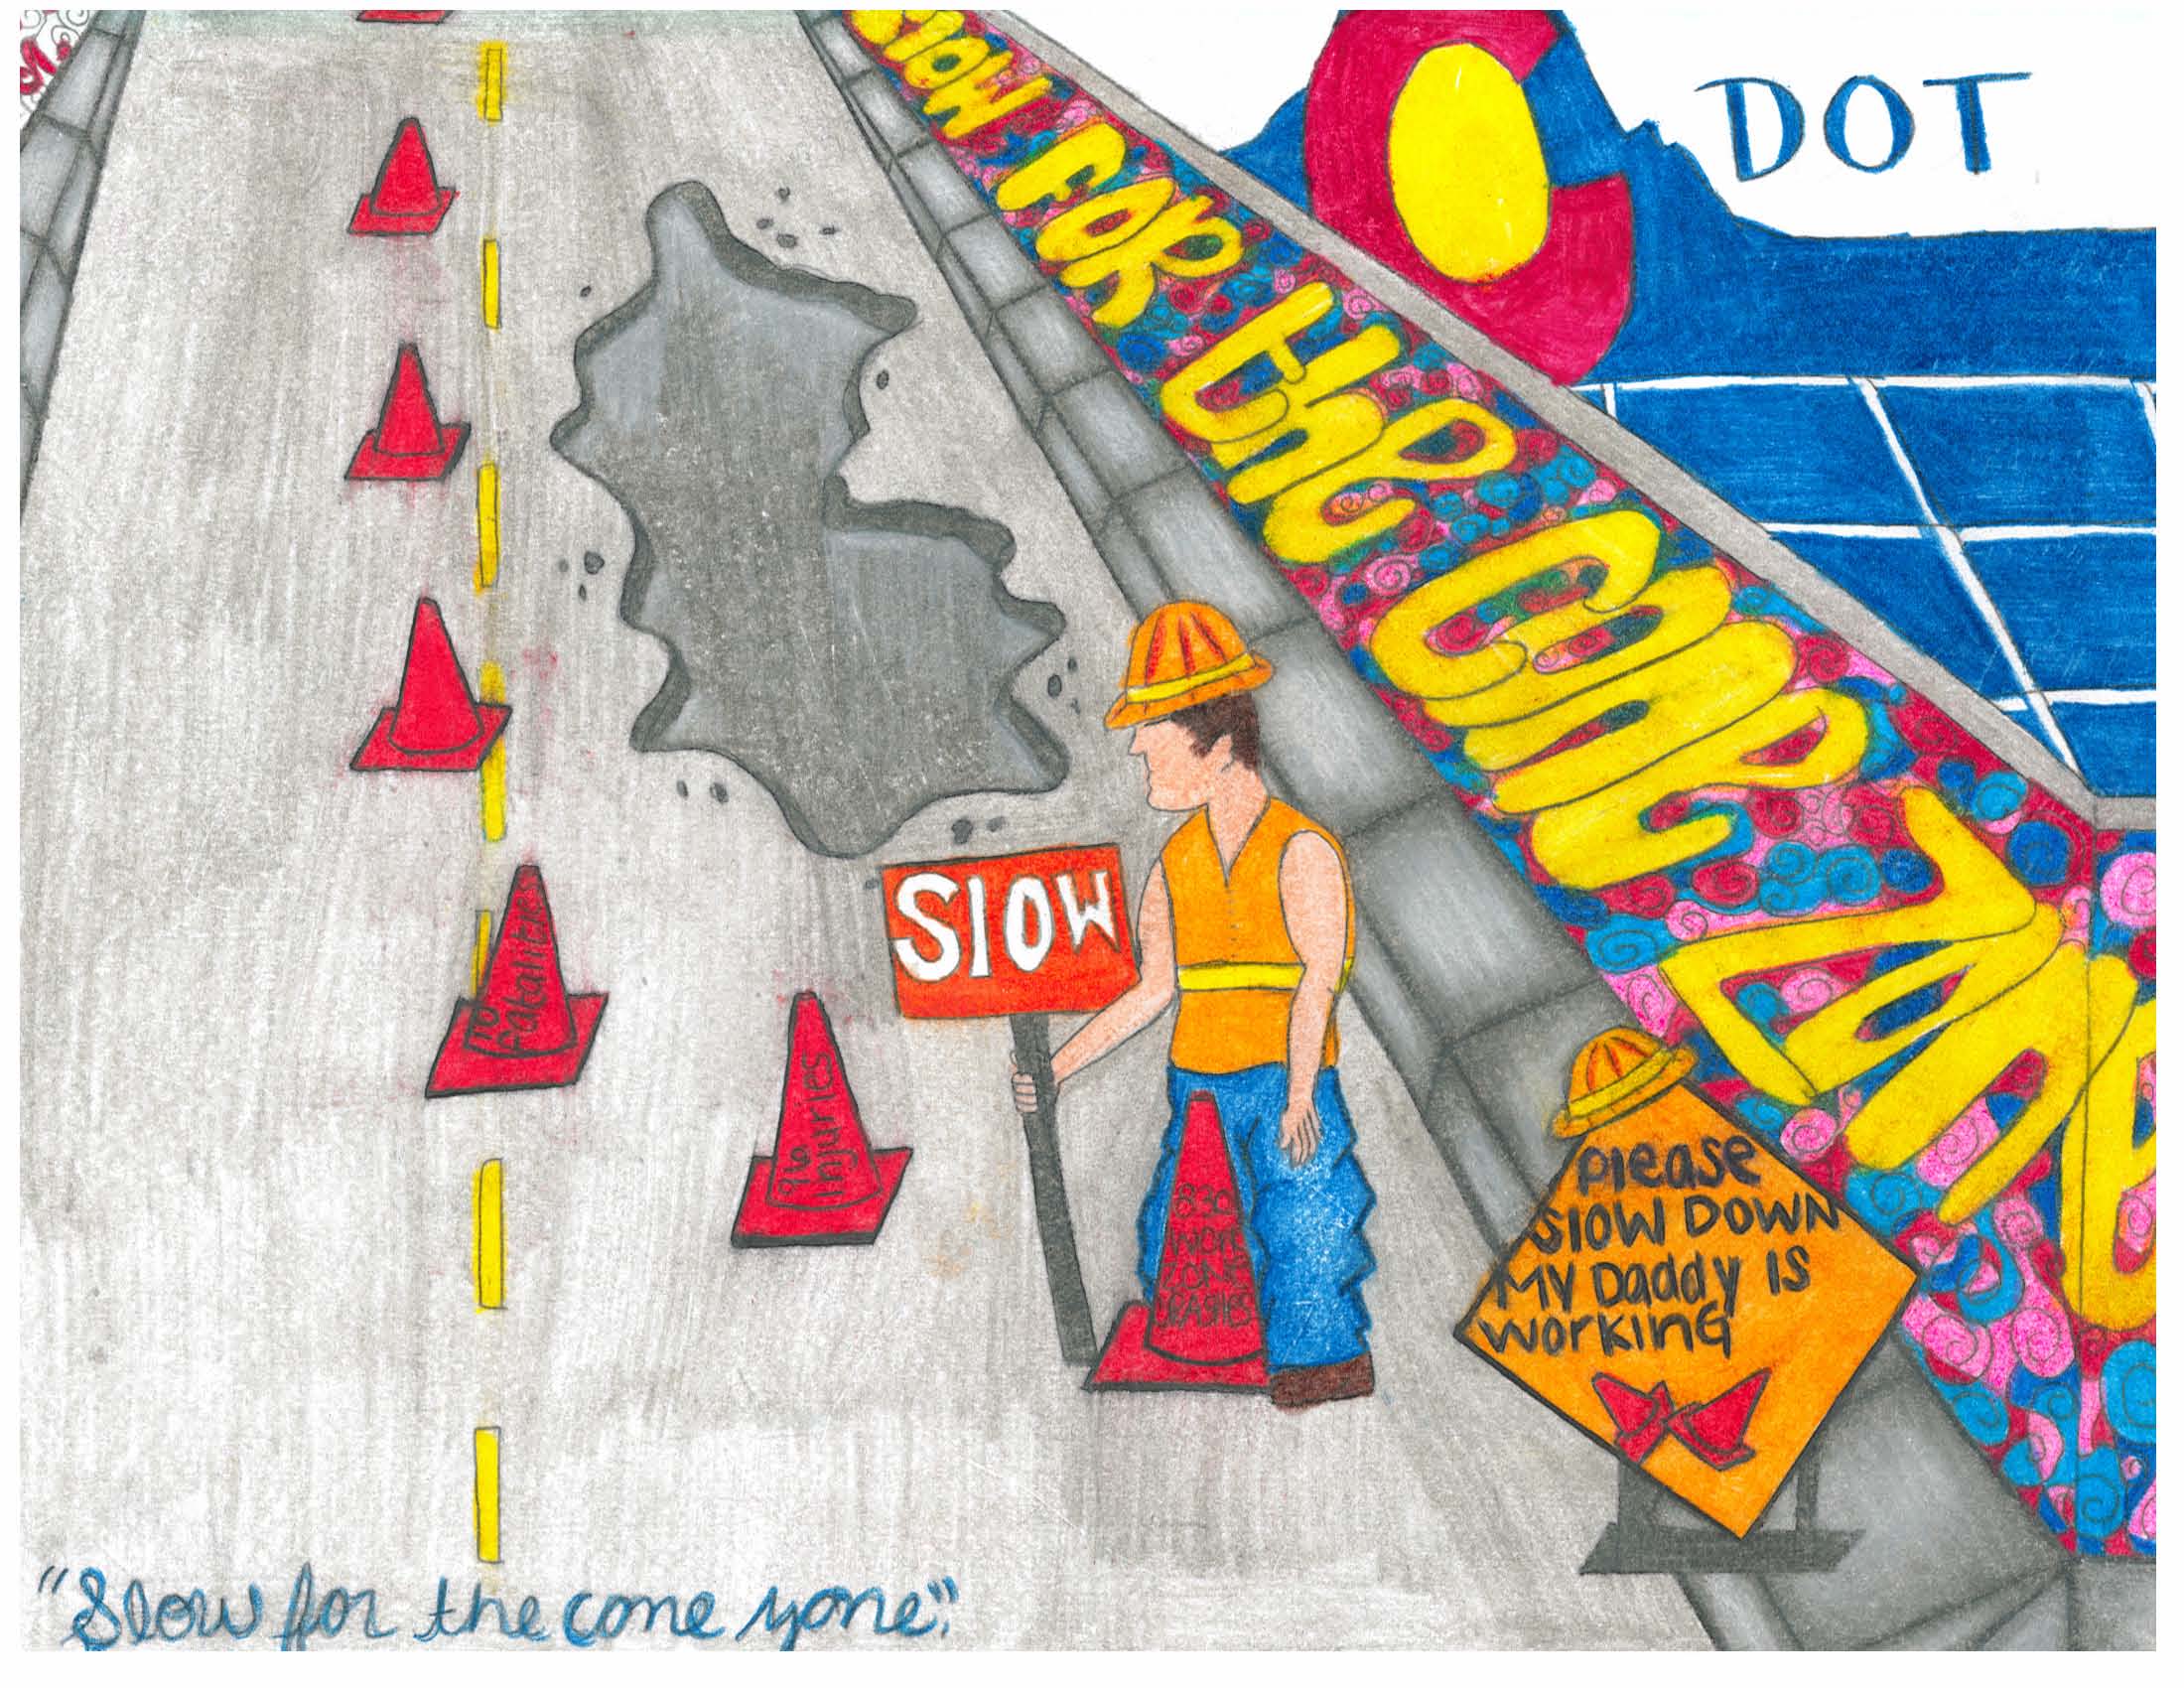 15-17 Year Old Cone Zone Poster Contest Winner detail image